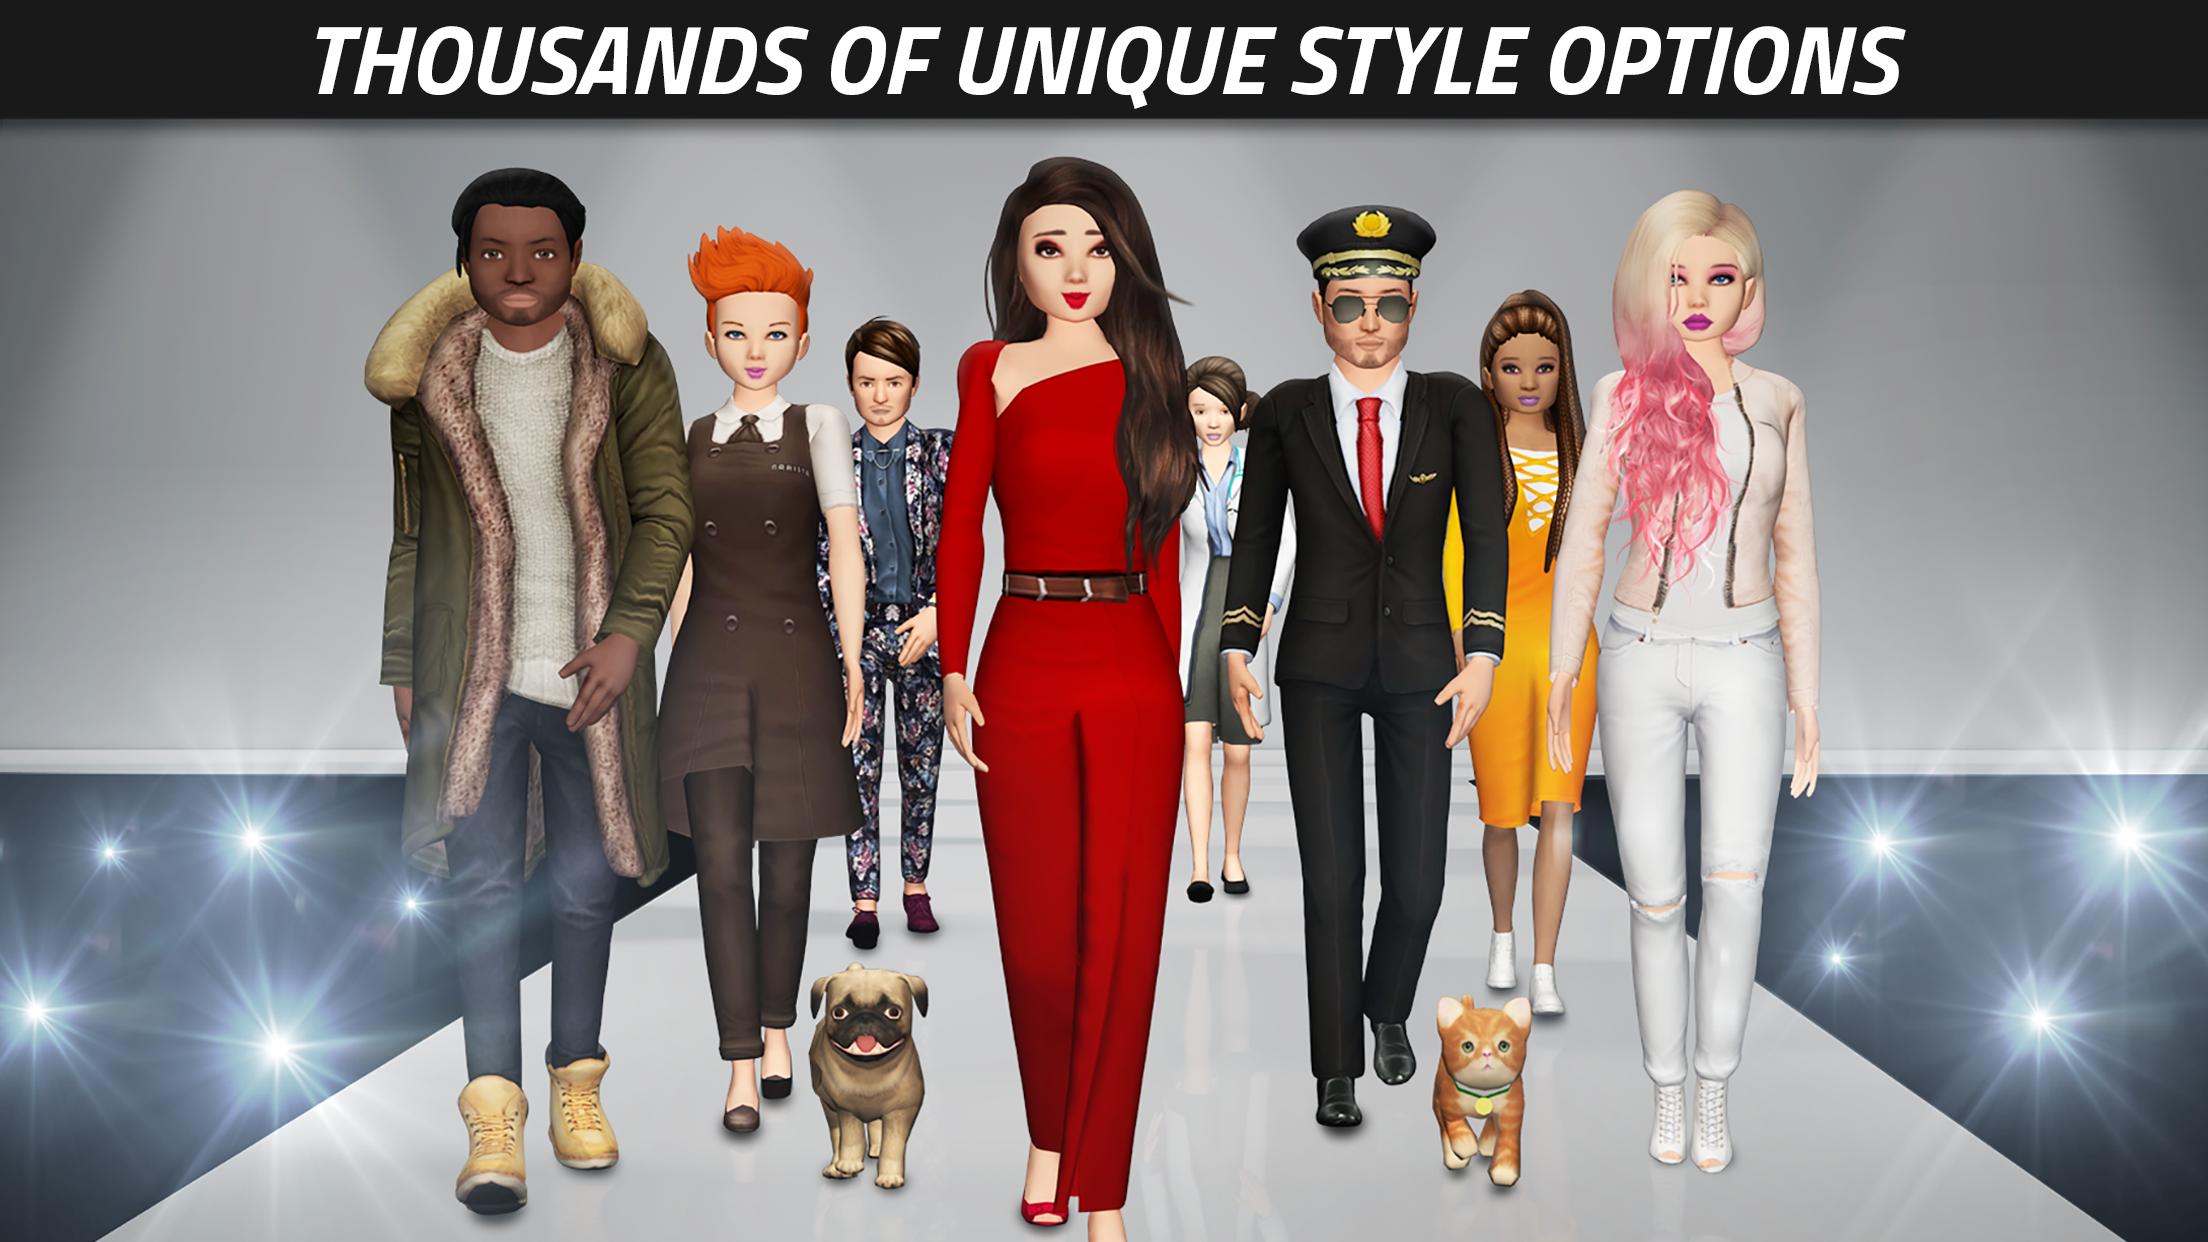 Avakin Life for Android - APK Download - 